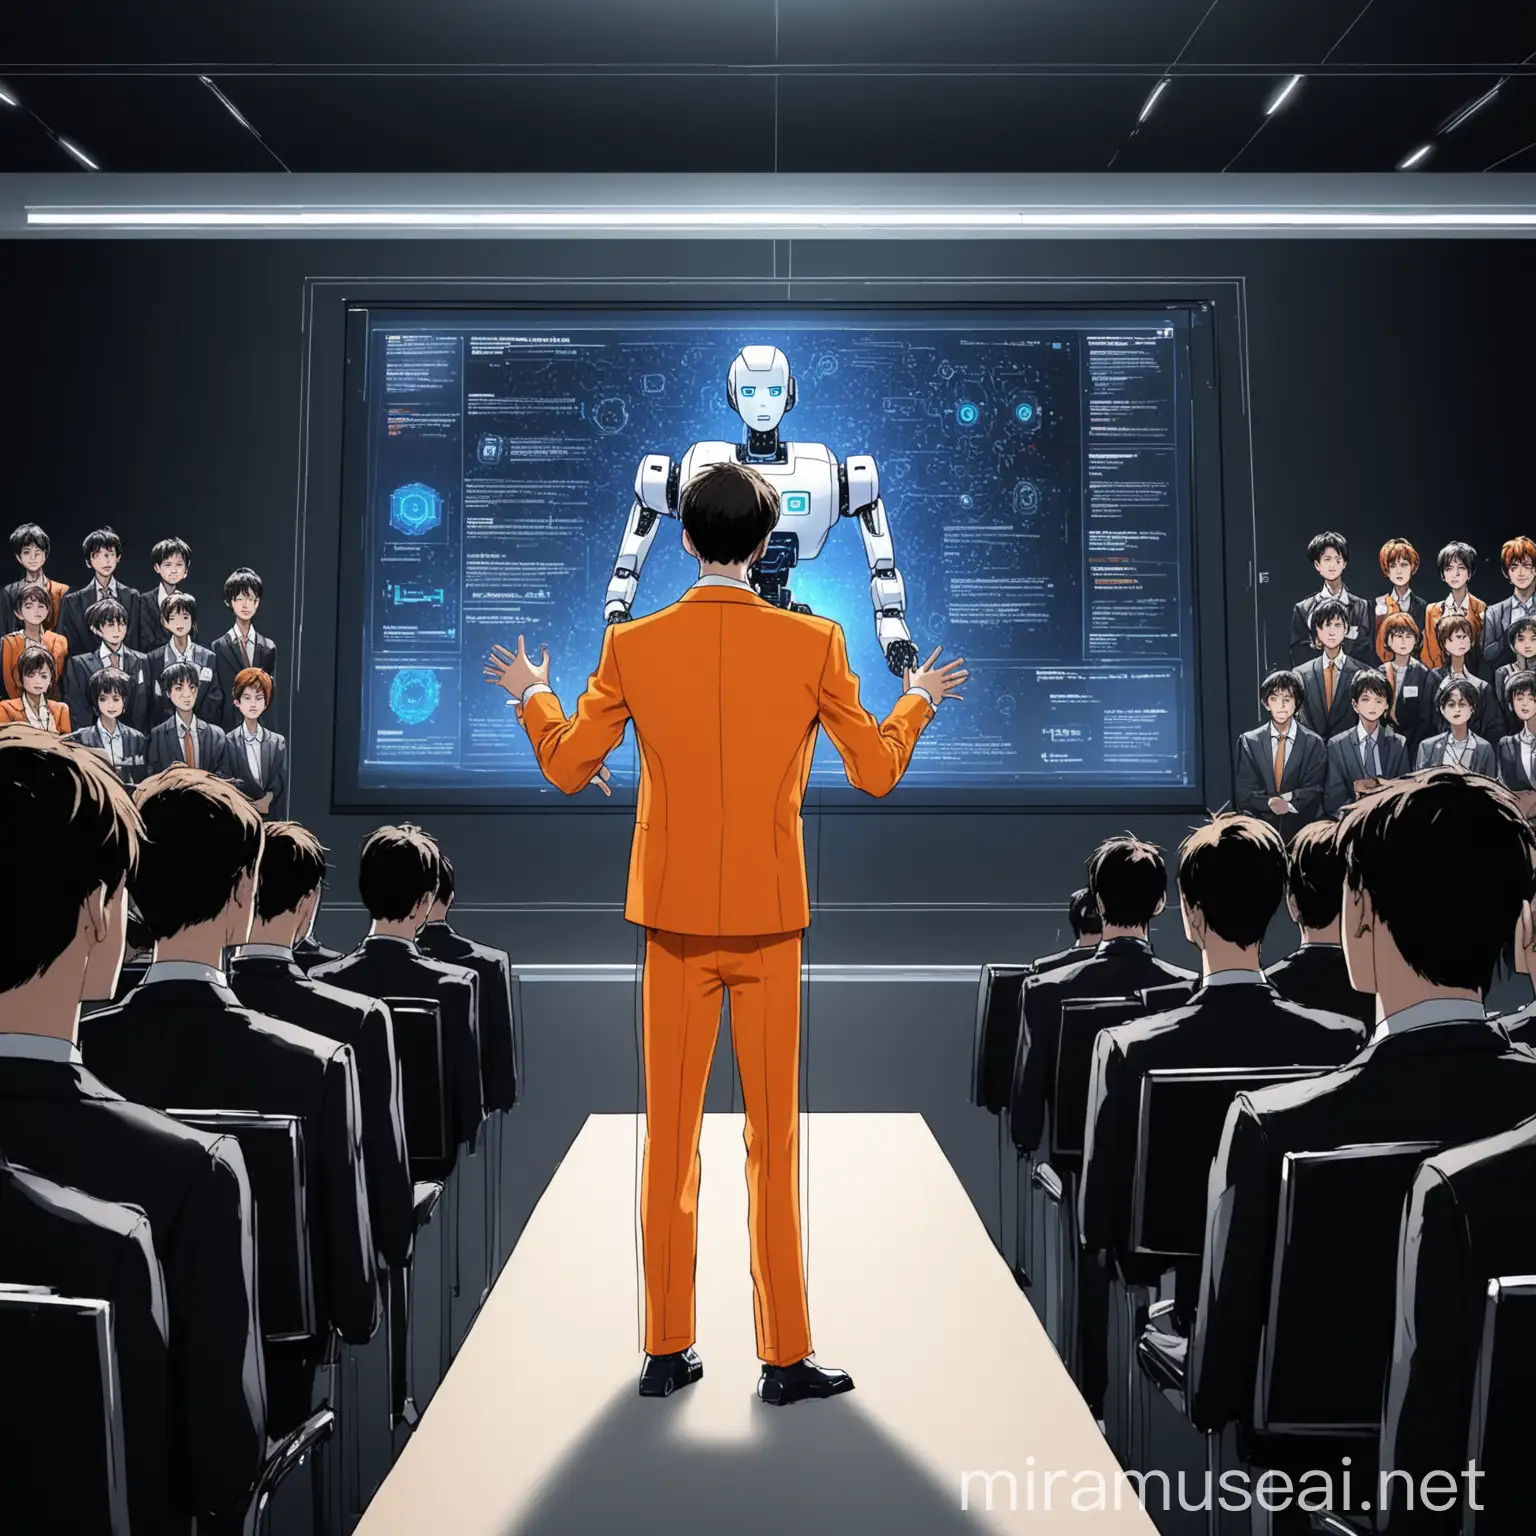 The background is the conference room.
There is an artificial intelligence robot on the beam screen.
A handsome 20-year-old man wearing an orange suit gives a speech.
The audience in the black suit is concentrating.